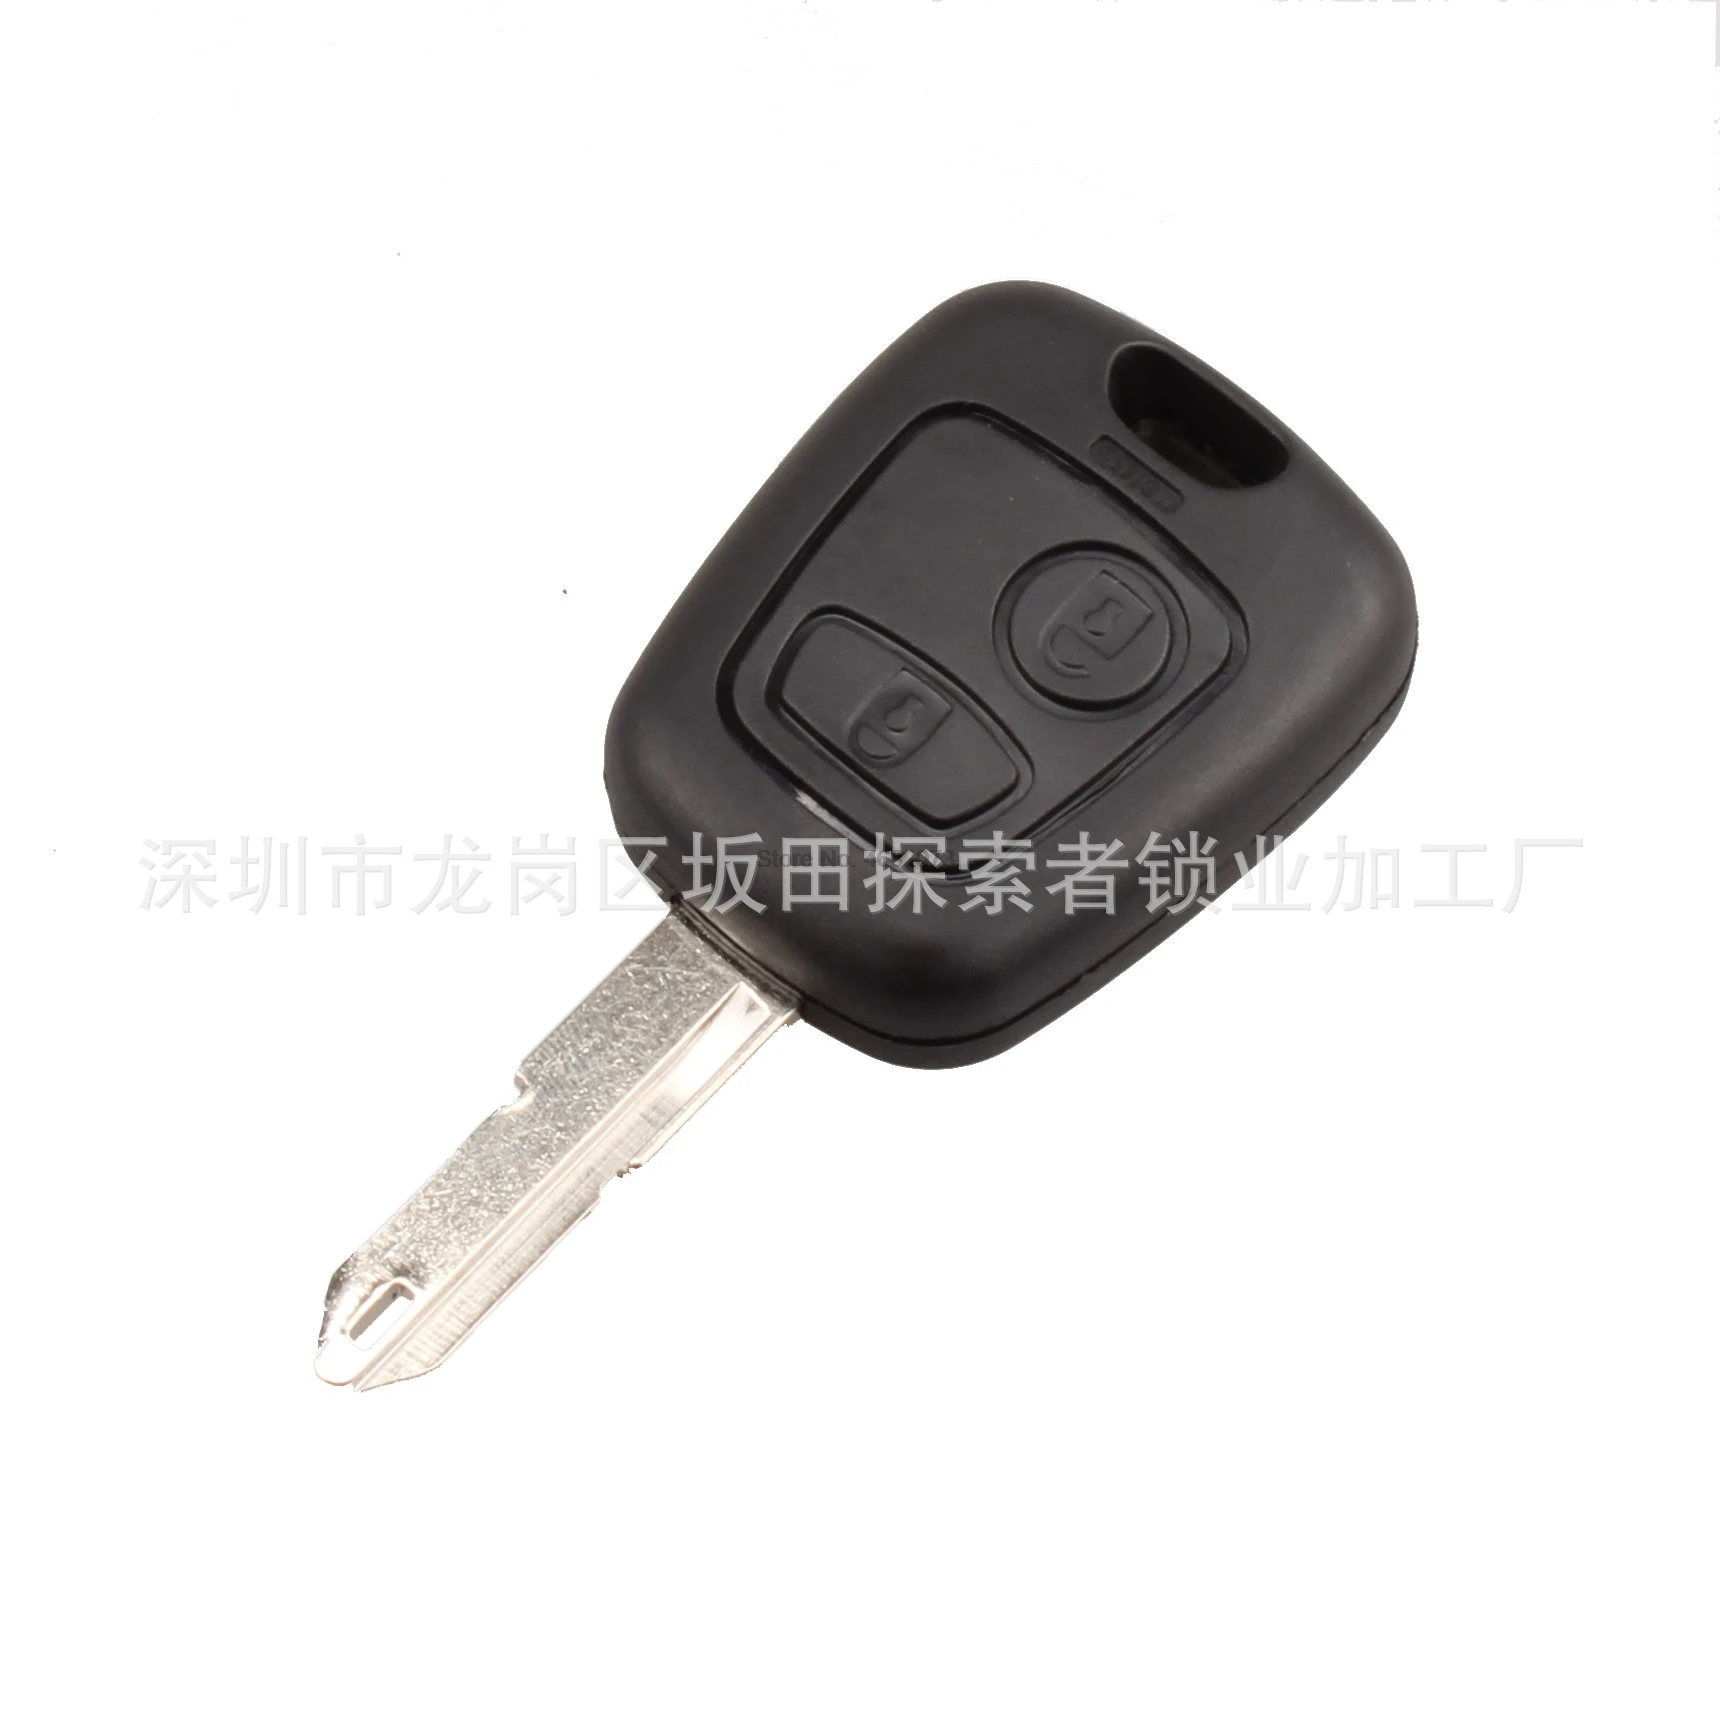 PEUGEOT 206 KEY FOB CASE AND UNCUT BLADE NEW REPLACEMENT 